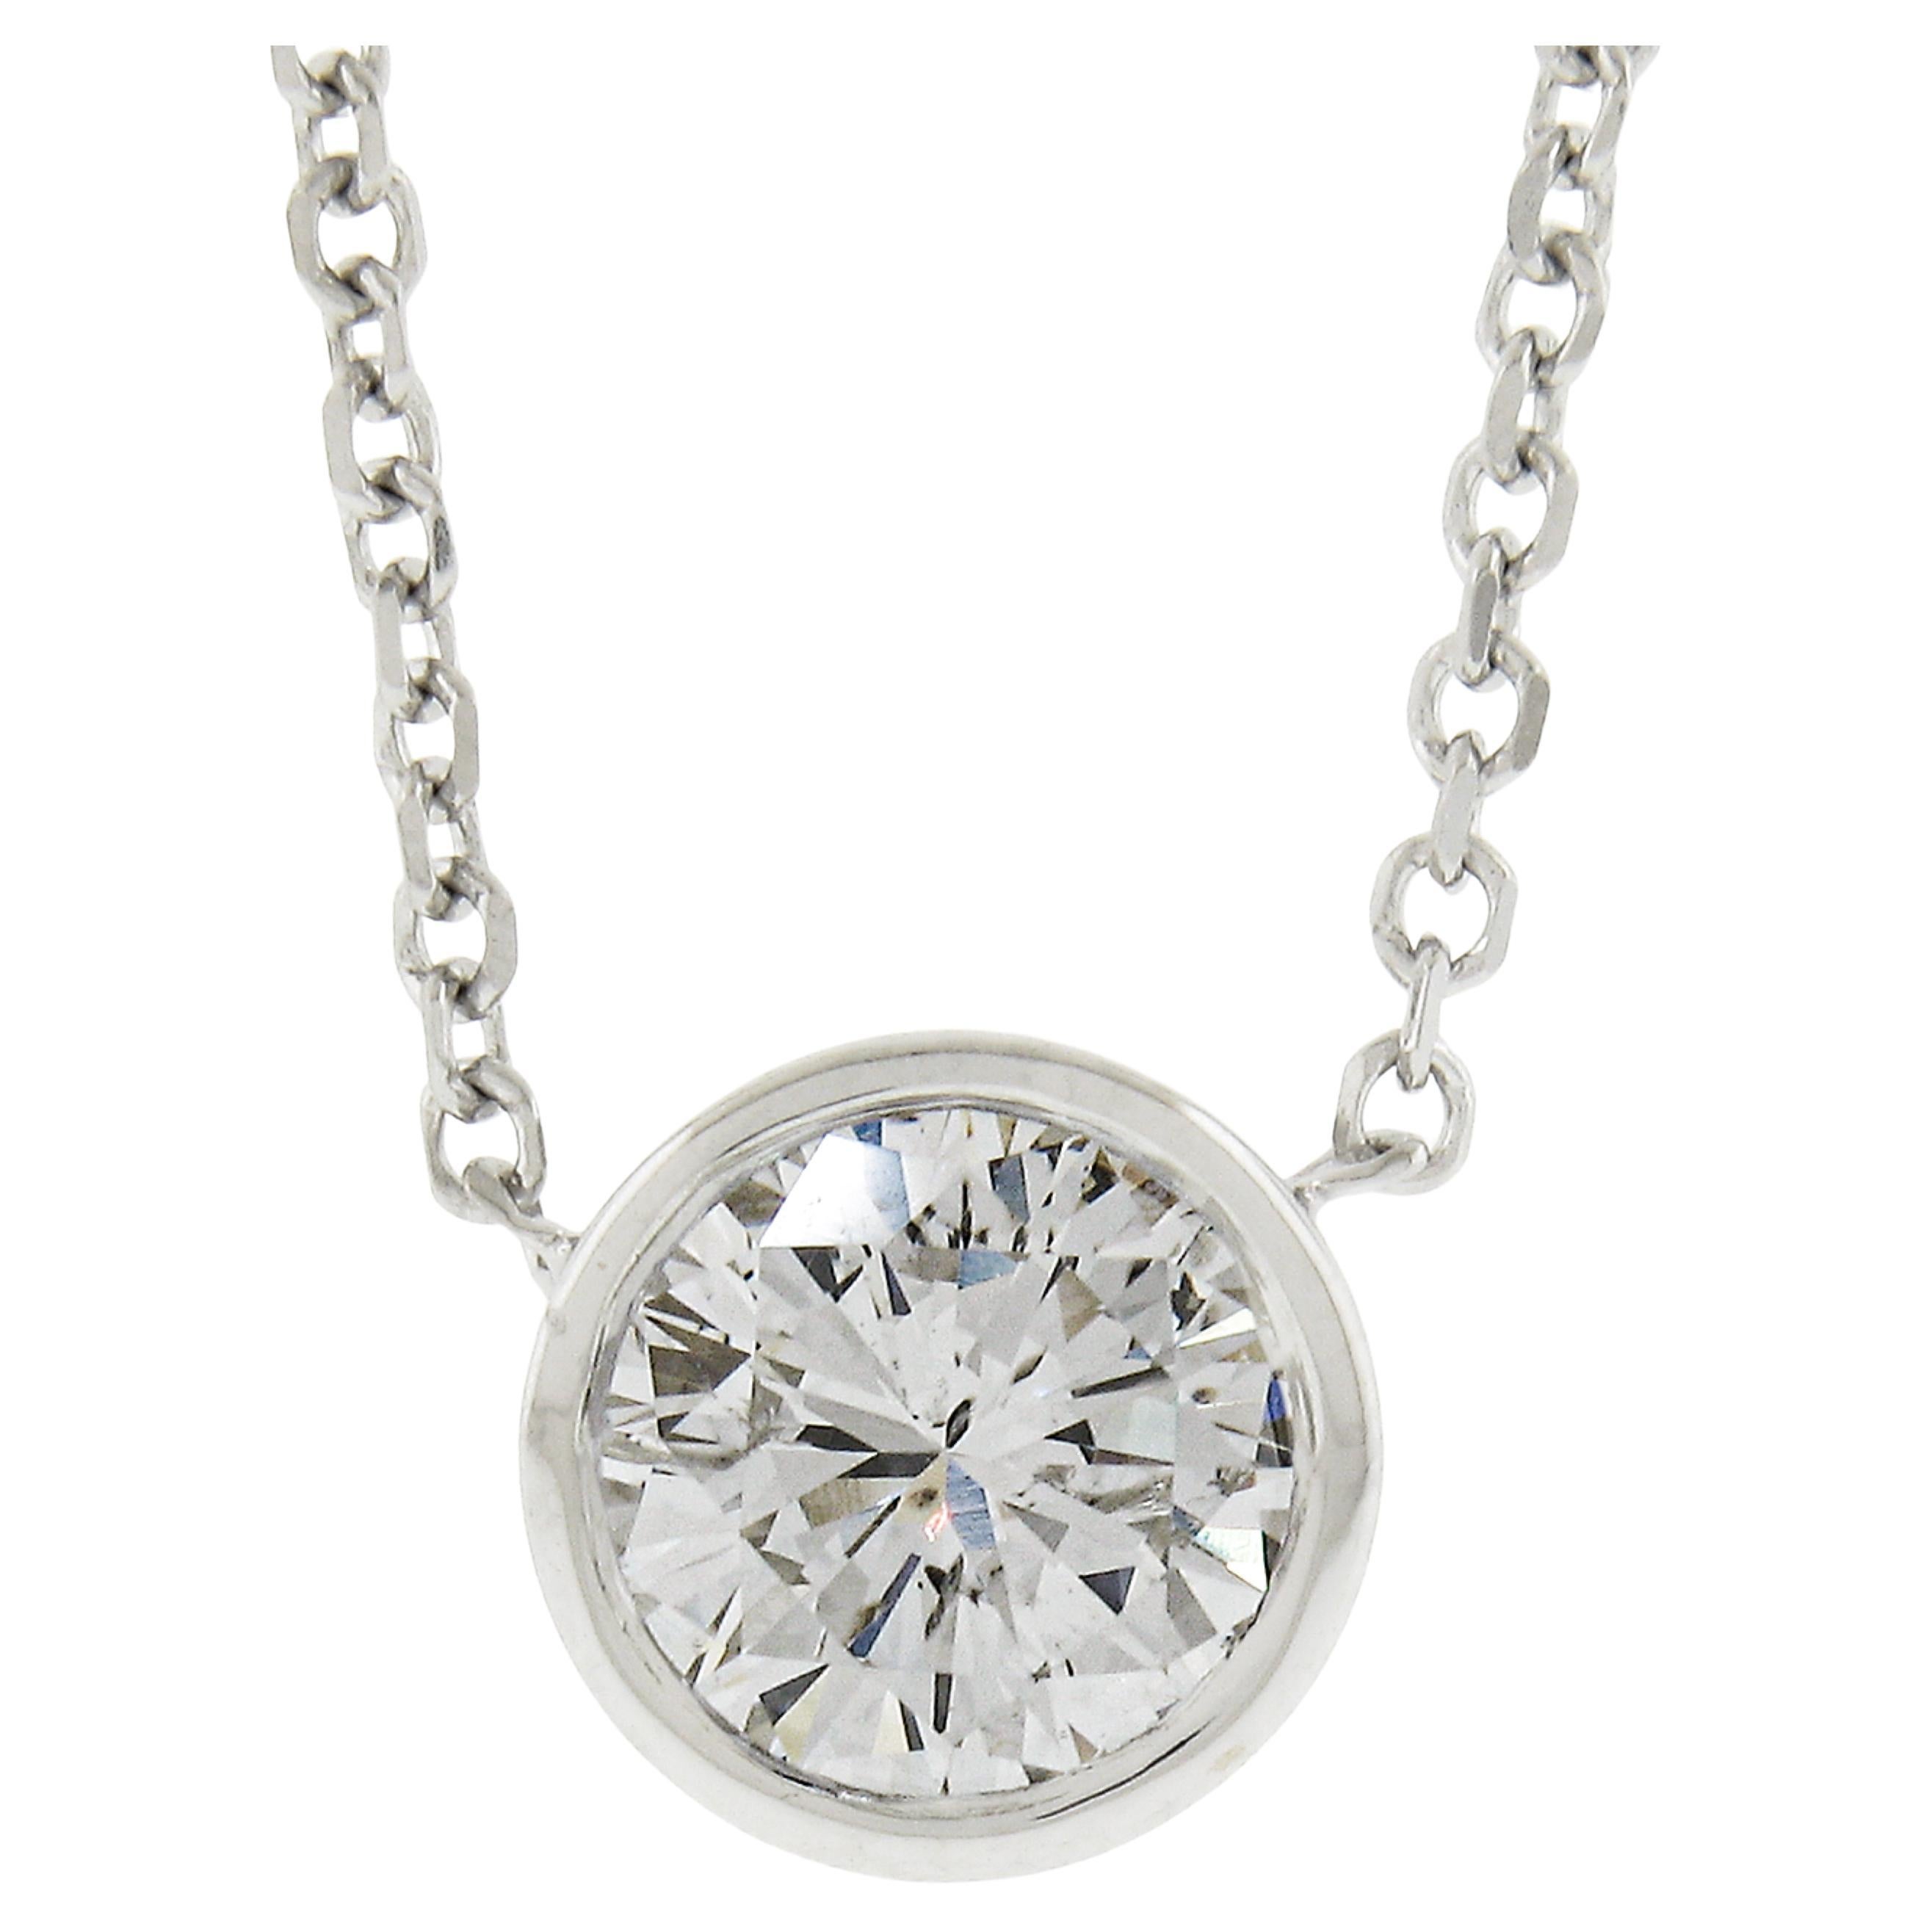 NEW 14k White Gold .70ct GIA Round Diamond Solitaire Pendant & Adjustable Chain For Sale